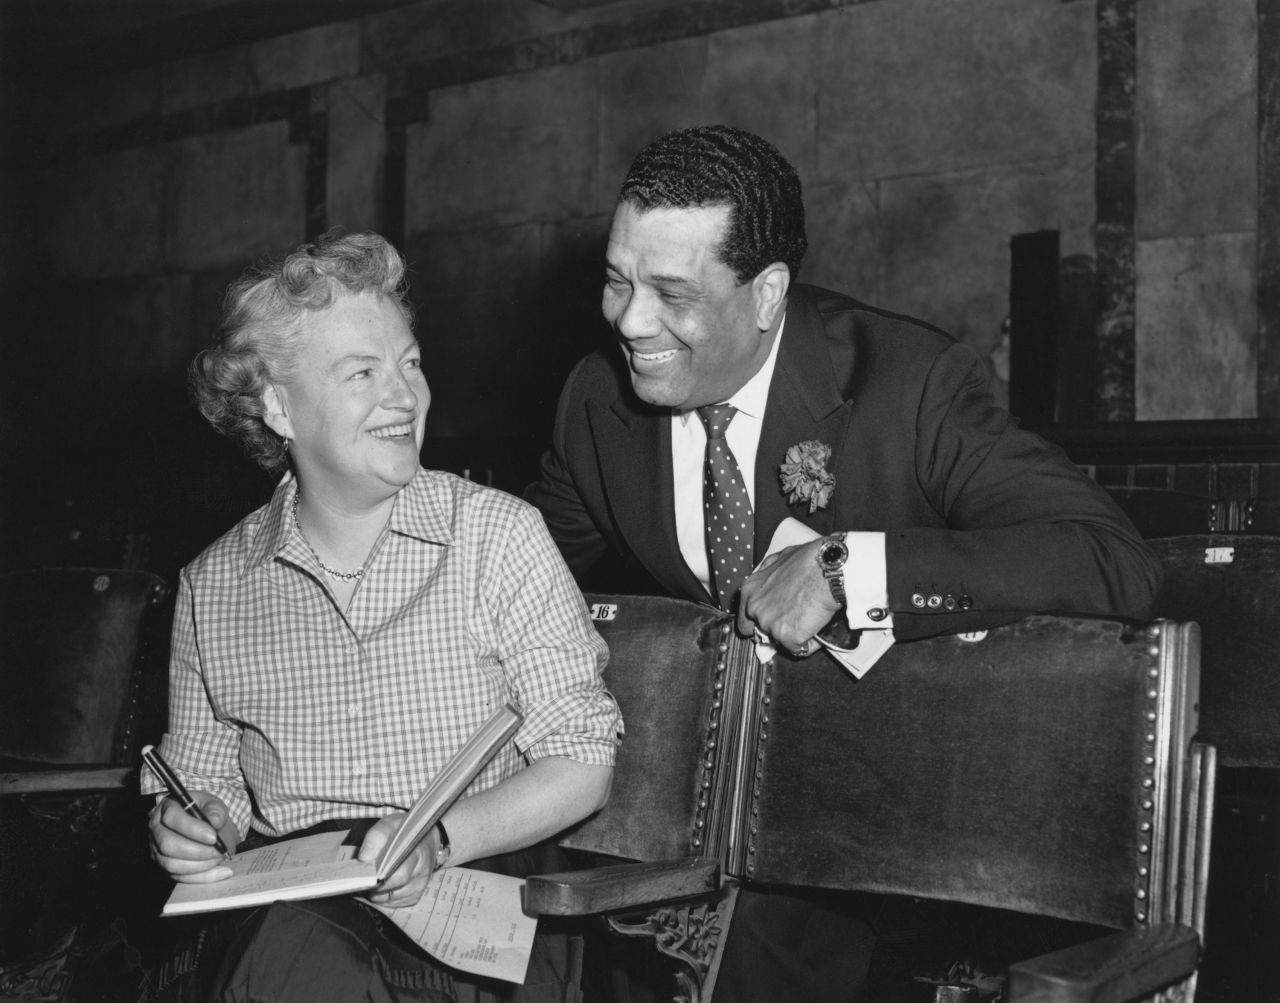 Hutchinson and comedian Gracie Fields during a rehearsal for the television show "Welcome Home to the Queen" at Lime Grove Studios, London, on May 14, 1954. 